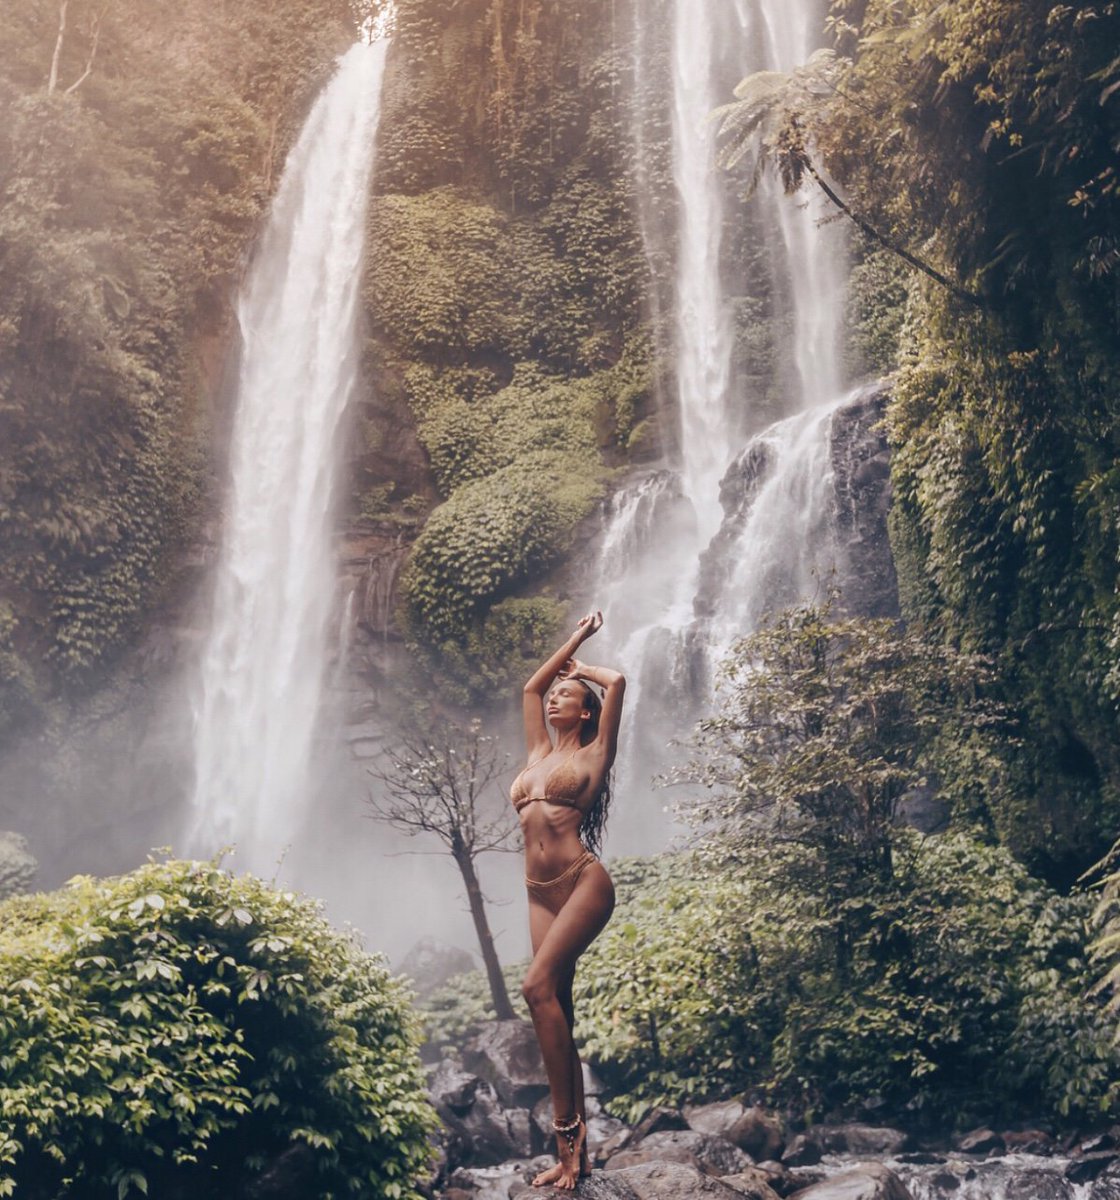 periskop 鍔 ære sexymi® on Twitter: "Being fit with the power of nature is sexy! . Model 📷  @anyuta_rai . . . . . #nature #naturelover #naturephotography #waterfall  #photography #photoshoot #model #supermodel #fashionmodel #traveler  #sexymitea #